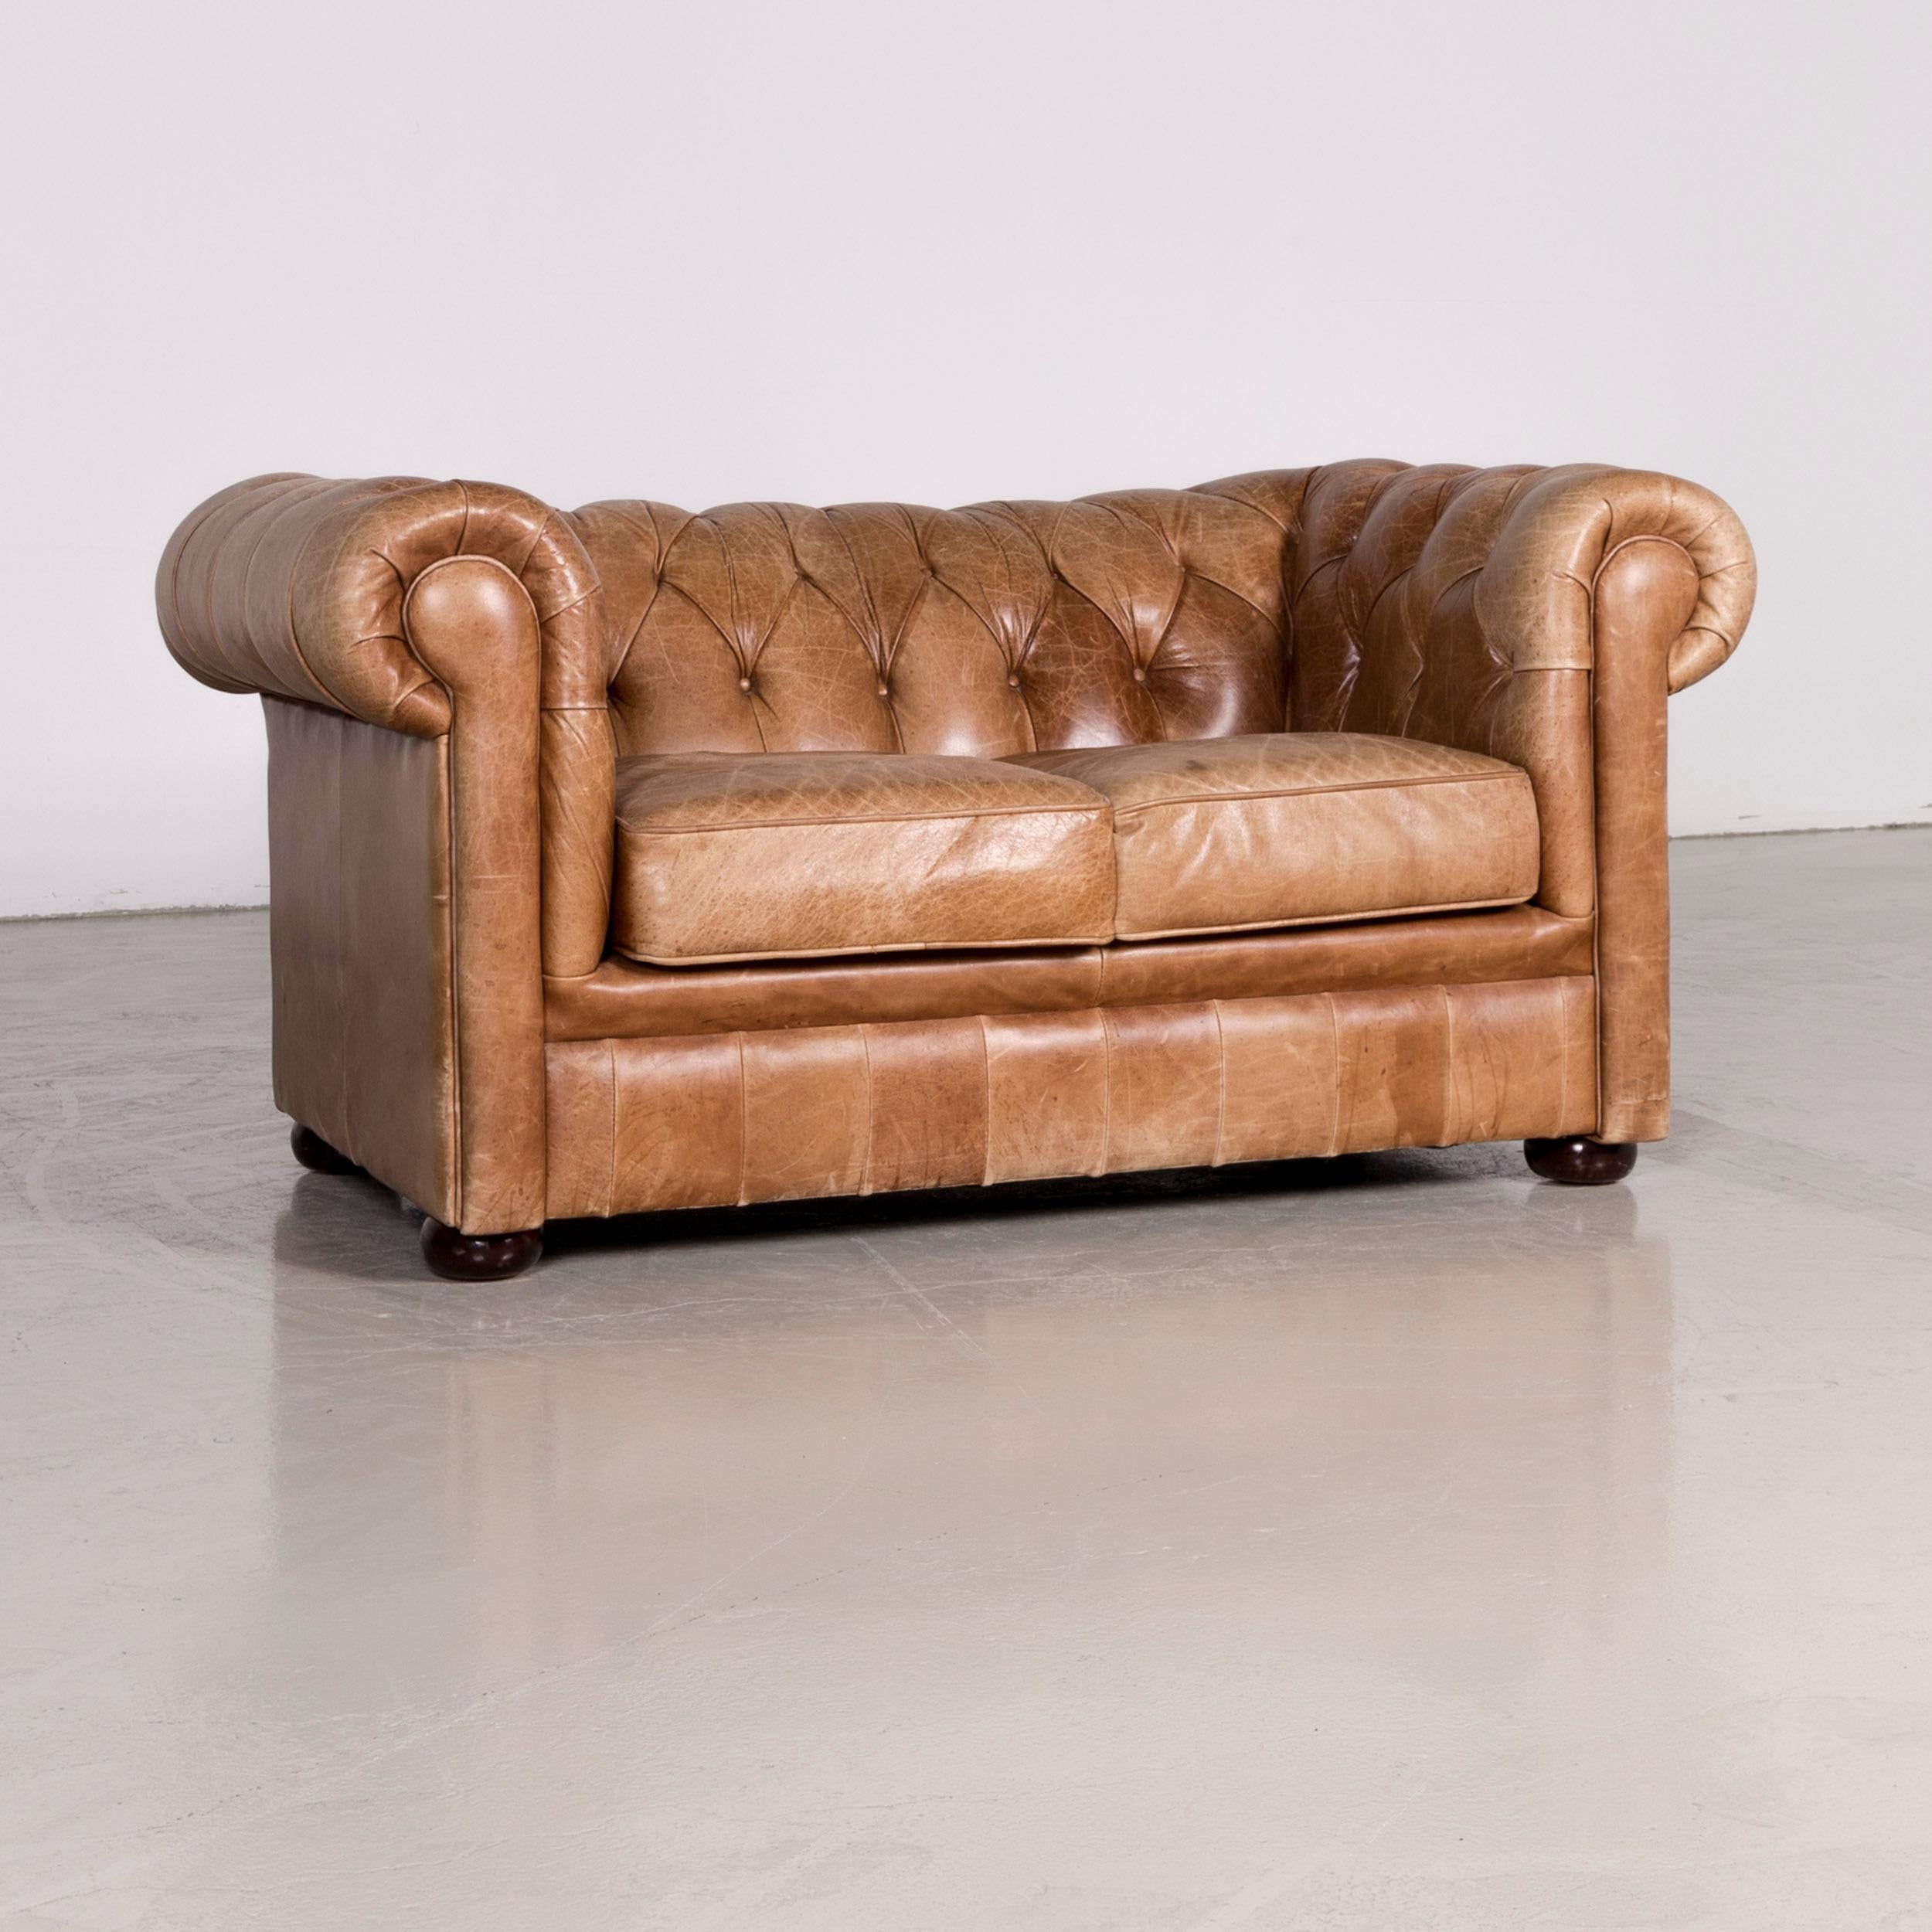 We bring to you a Chesterfield leather sofa brown red vintage two-seat couch.